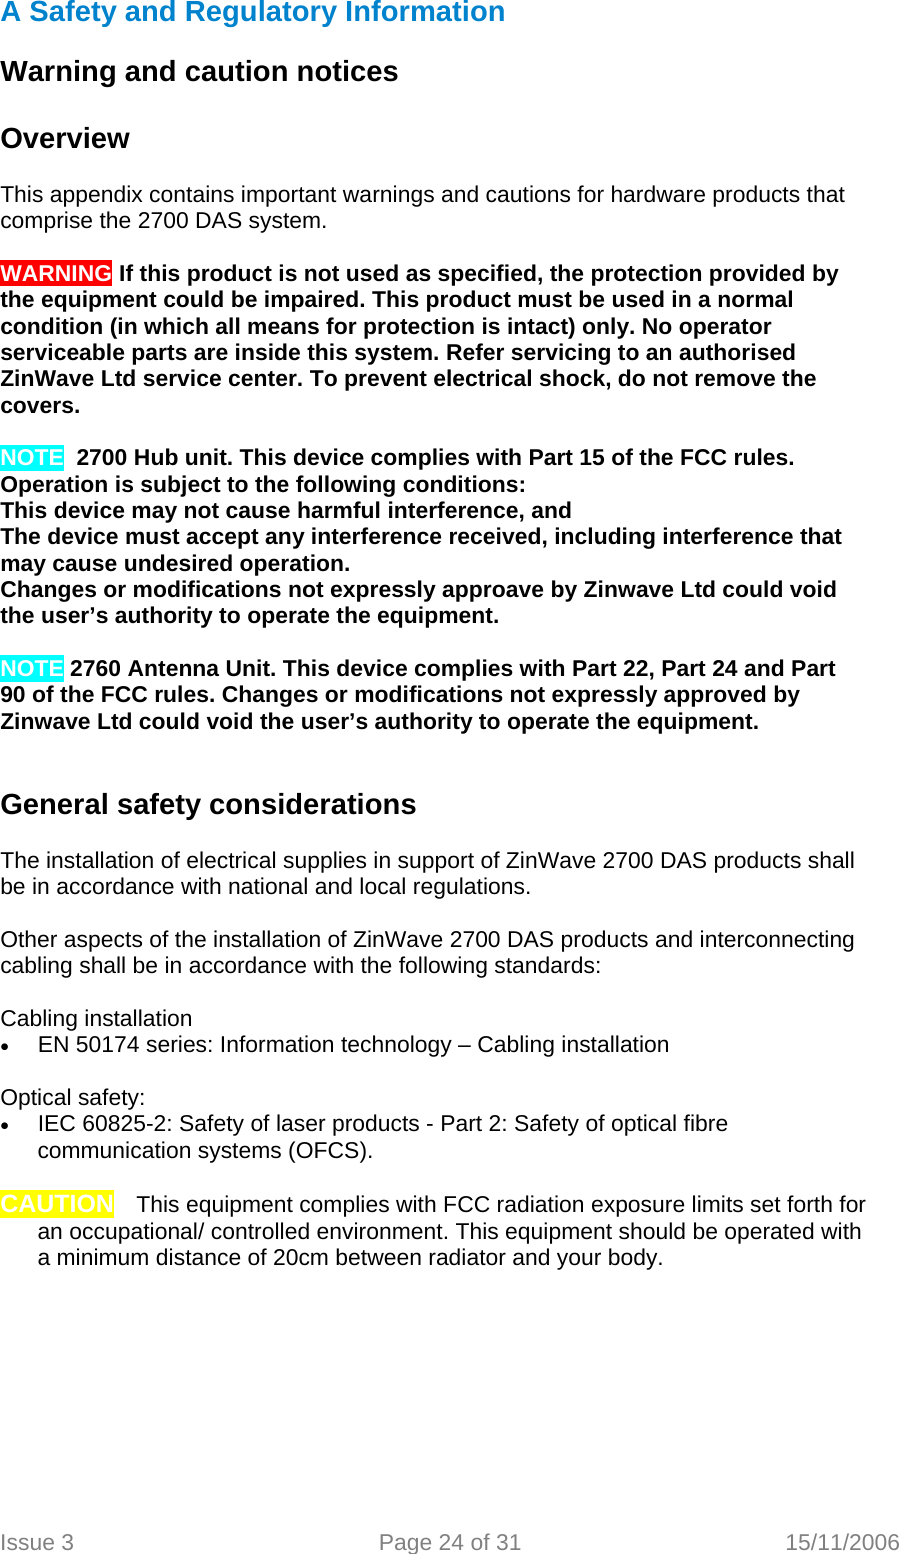 A Safety and Regulatory Information   Warning and caution notices   Overview  This appendix contains important warnings and cautions for hardware products that comprise the 2700 DAS system.  WARNING If this product is not used as specified, the protection provided by the equipment could be impaired. This product must be used in a normal condition (in which all means for protection is intact) only. No operator serviceable parts are inside this system. Refer servicing to an authorised ZinWave Ltd service center. To prevent electrical shock, do not remove the covers.   NOTE  2700 Hub unit. This device complies with Part 15 of the FCC rules. Operation is subject to the following conditions: This device may not cause harmful interference, and The device must accept any interference received, including interference that may cause undesired operation. Changes or modifications not expressly approave by Zinwave Ltd could void the user’s authority to operate the equipment.  NOTE 2760 Antenna Unit. This device complies with Part 22, Part 24 and Part 90 of the FCC rules. Changes or modifications not expressly approved by Zinwave Ltd could void the user’s authority to operate the equipment.   General safety considerations   The installation of electrical supplies in support of ZinWave 2700 DAS products shall be in accordance with national and local regulations.  Other aspects of the installation of ZinWave 2700 DAS products and interconnecting cabling shall be in accordance with the following standards:  Cabling installation  • EN 50174 series: Information technology – Cabling installation  Optical safety: • IEC 60825-2: Safety of laser products - Part 2: Safety of optical fibre communication systems (OFCS).  CAUTION TThis equipment complies with FCC radiation exposure limits set forth for an occupational/ controlled environment. This equipment should be operated with a minimum distance of 20cm between radiator and your body.        Issue 3  Page 24 of 31  15/11/2006    